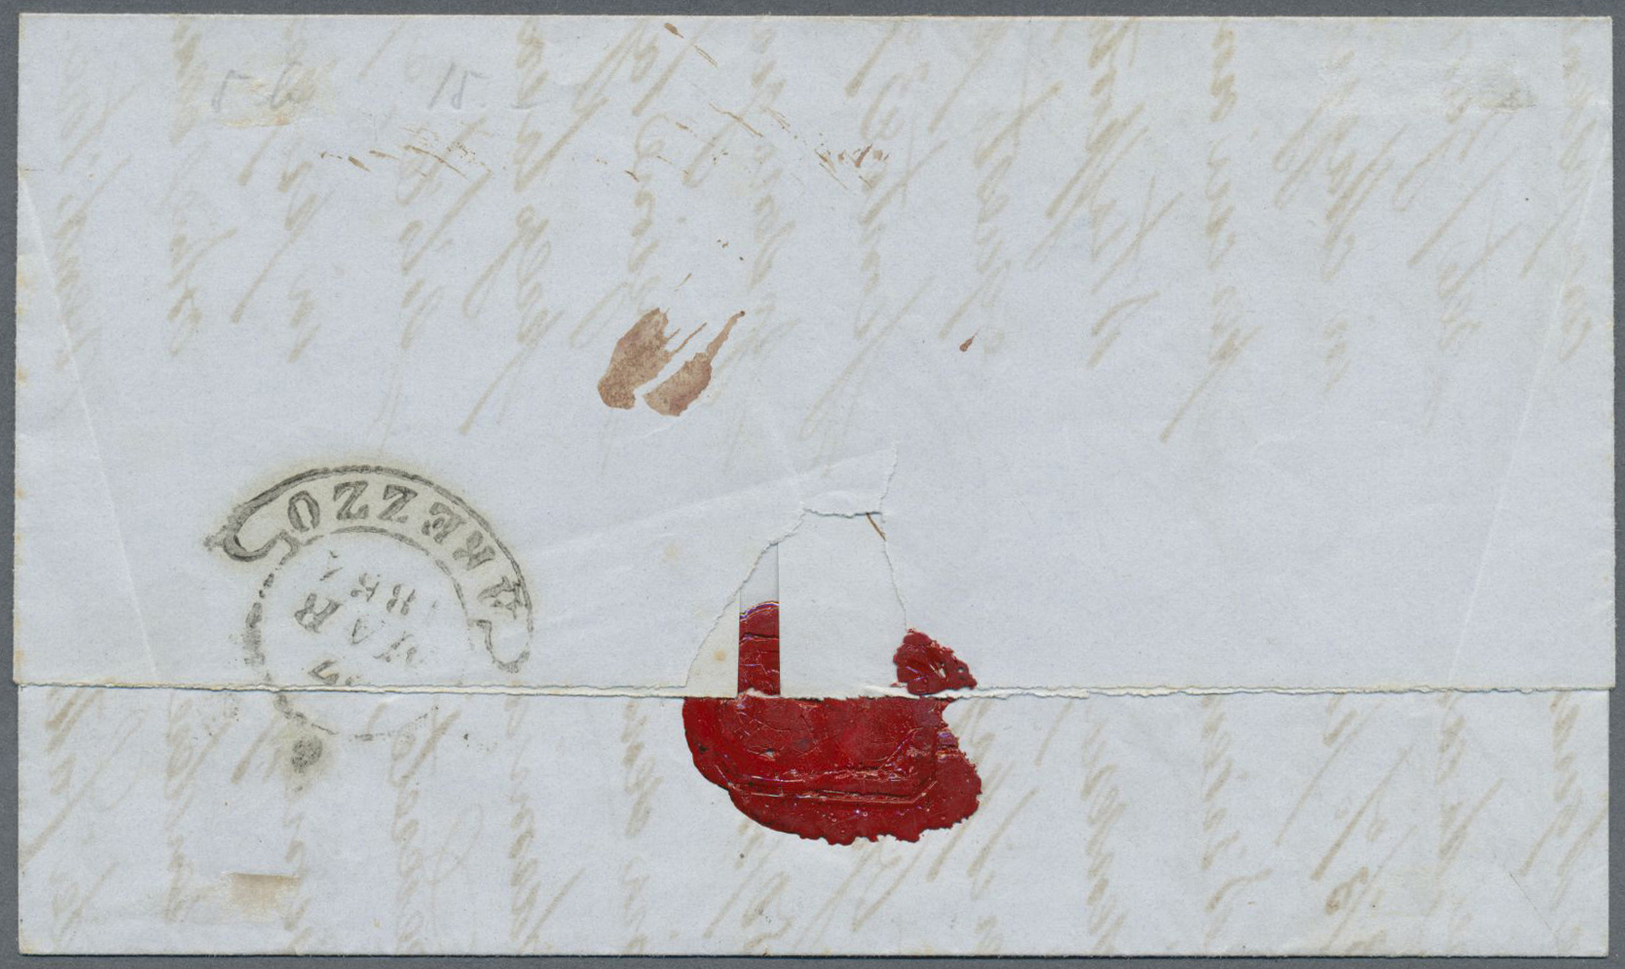 Br Italien - Altitalienische Staaten: Toscana: 1854. Letter , M/s Endored "Pressantissimi" And "Franca" With 2 Cr - Tuscany